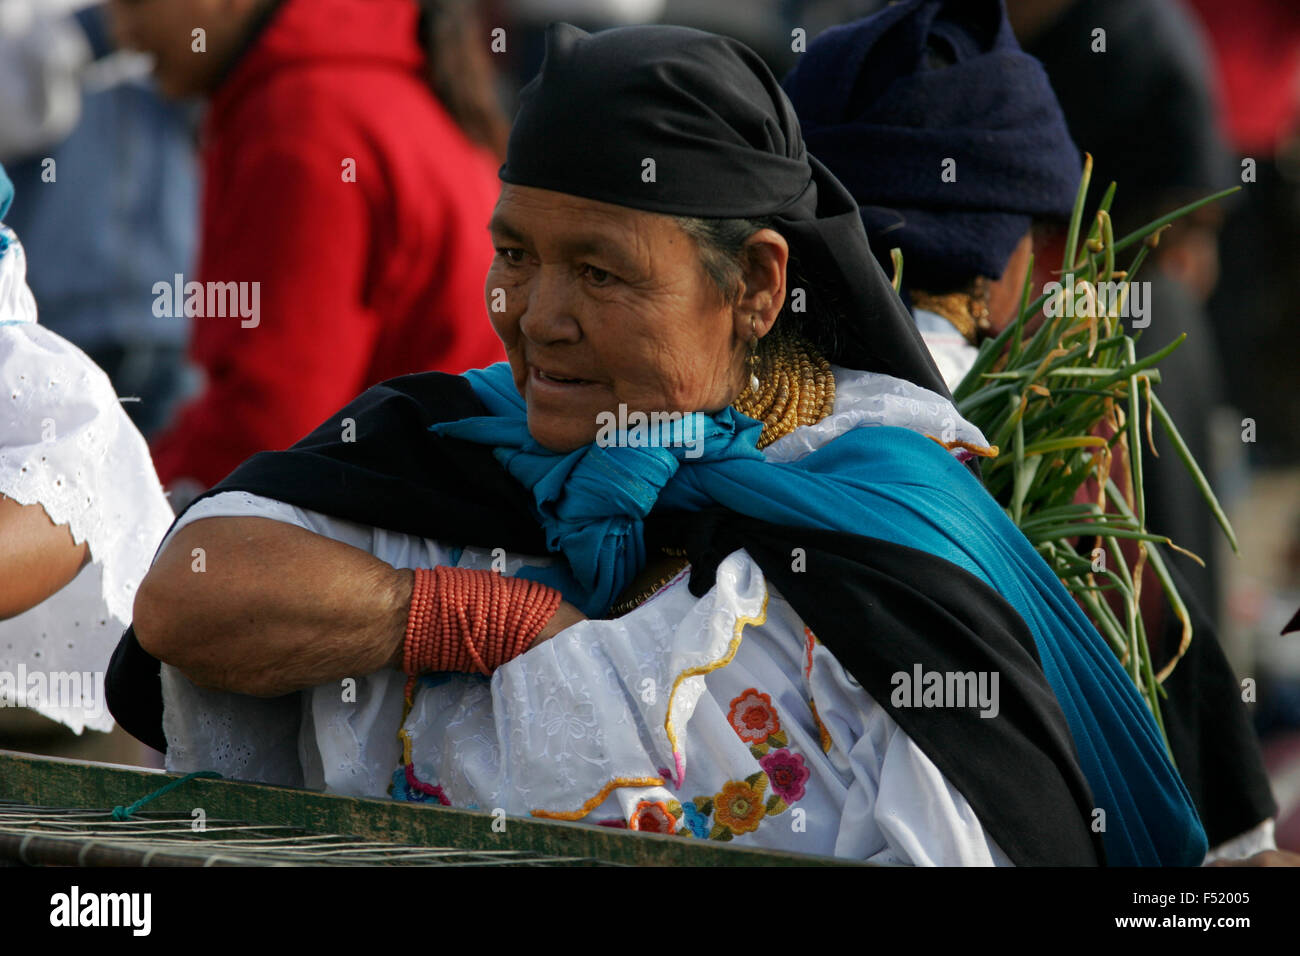 Indigenous woman wearing traditional dress and shopping at Otavalo market, Ecuador, South America Stock Photo